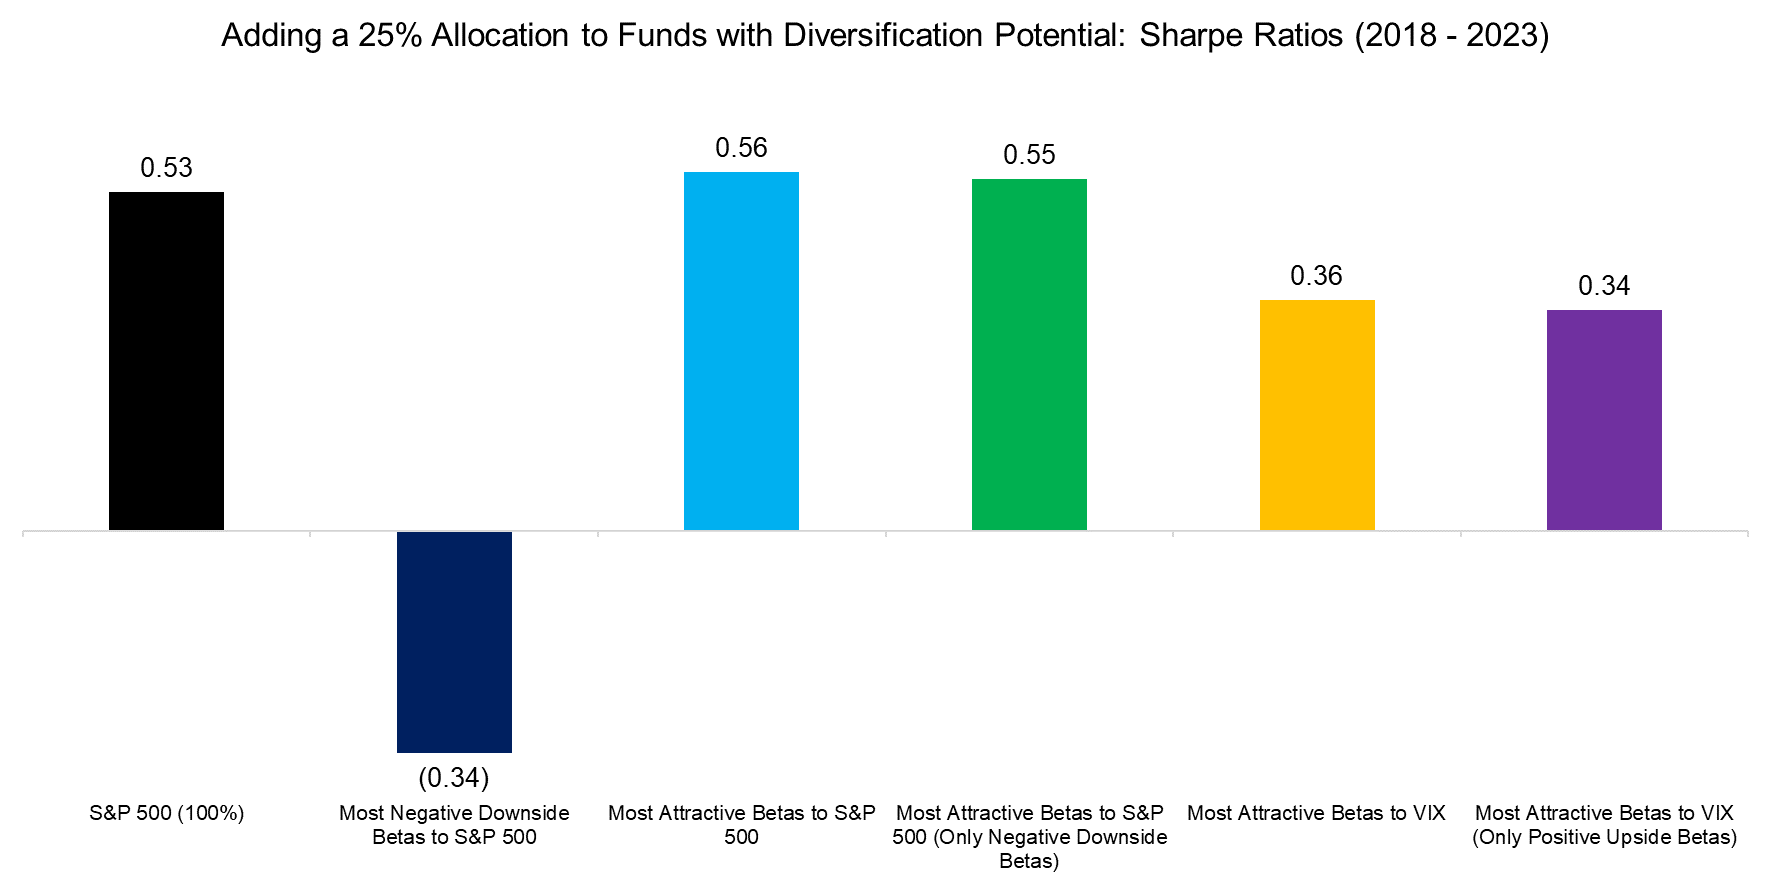 Adding a 25% Allocation to Funds with Diversification Potential Sharpe Ratios (2018 - 2023)